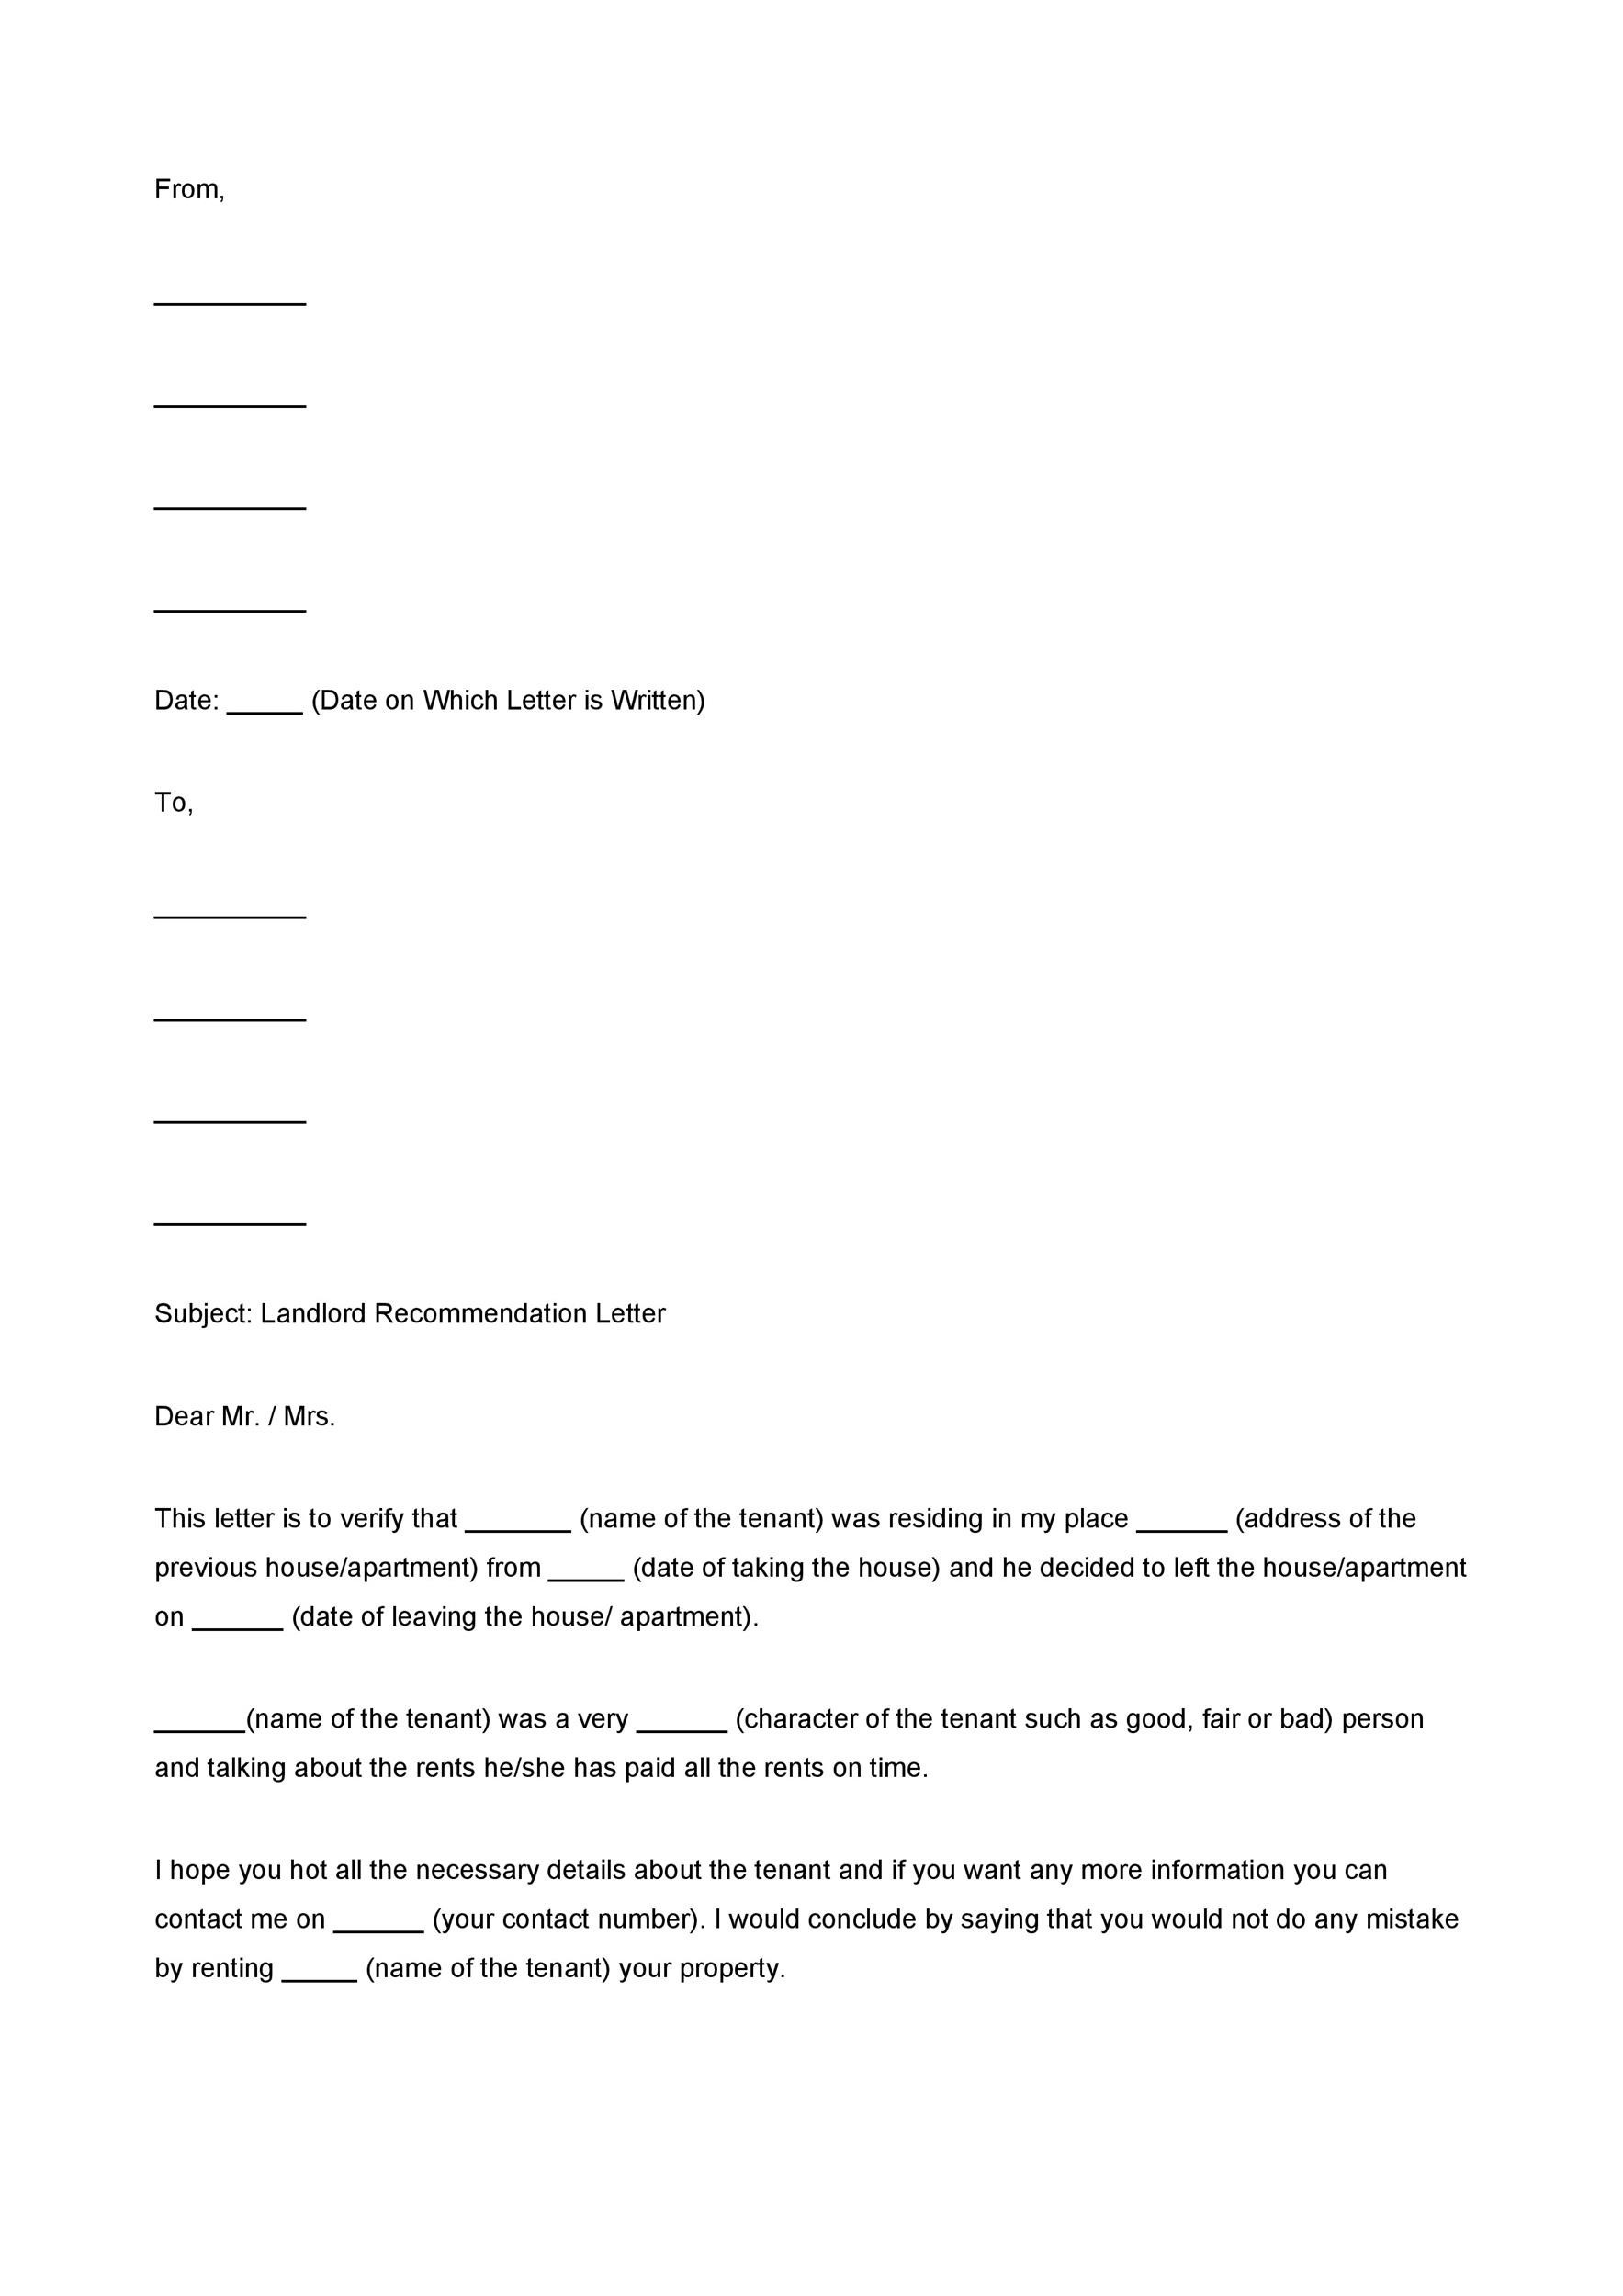 40 Landlord Reference Letters And Form Samples ᐅ Templatelab